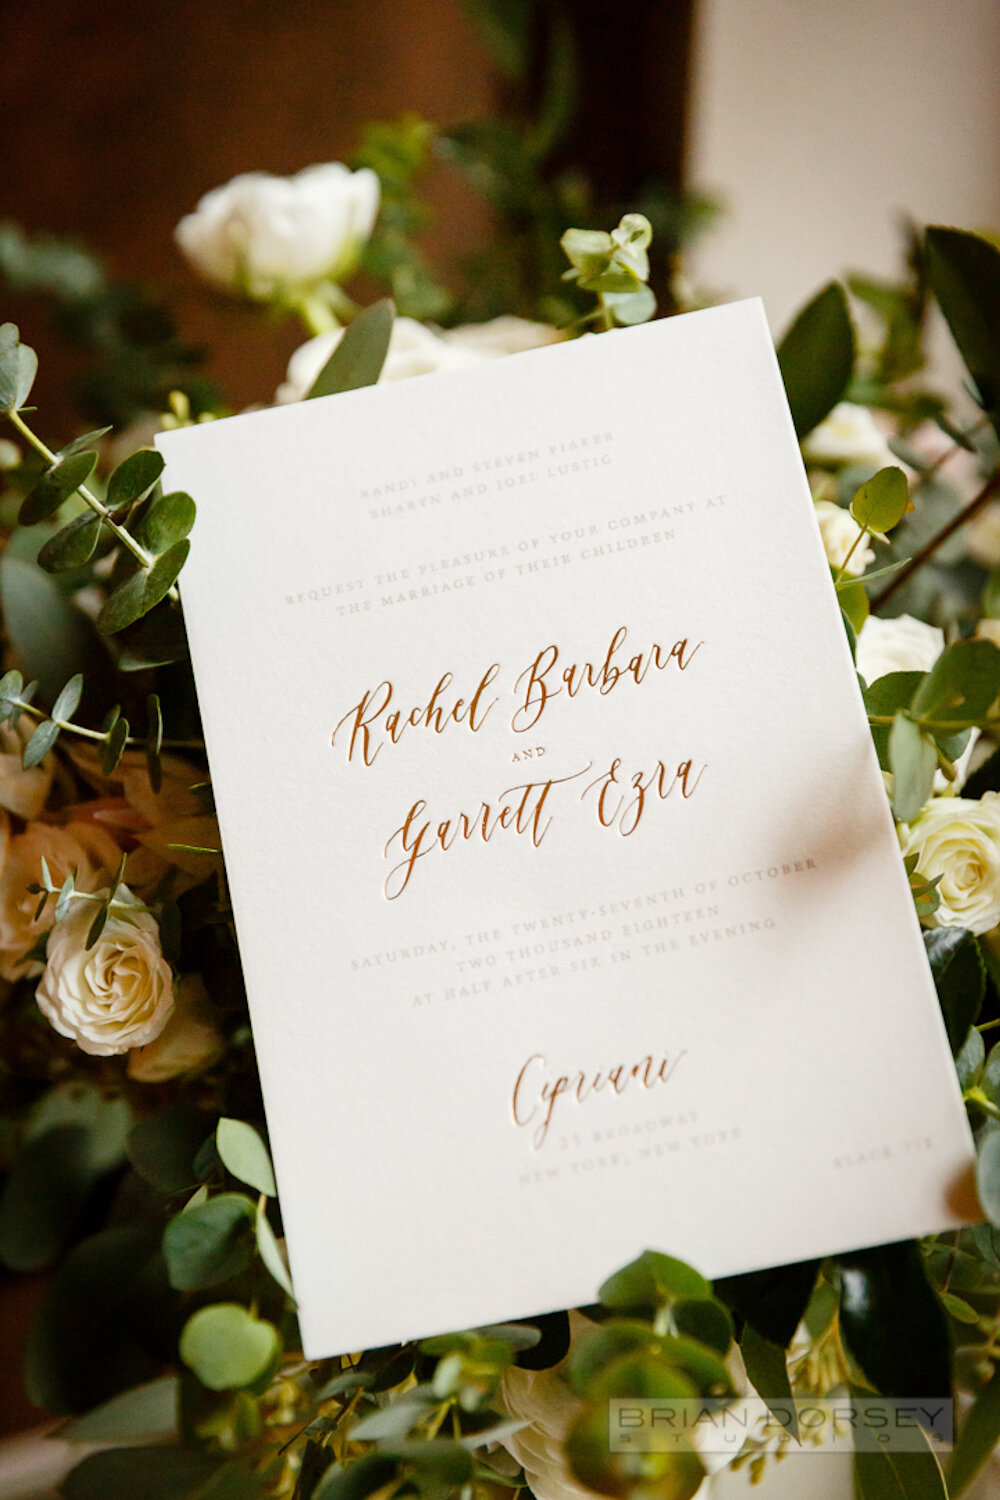 Calligraphy and metallic foil stamped wedding invitation